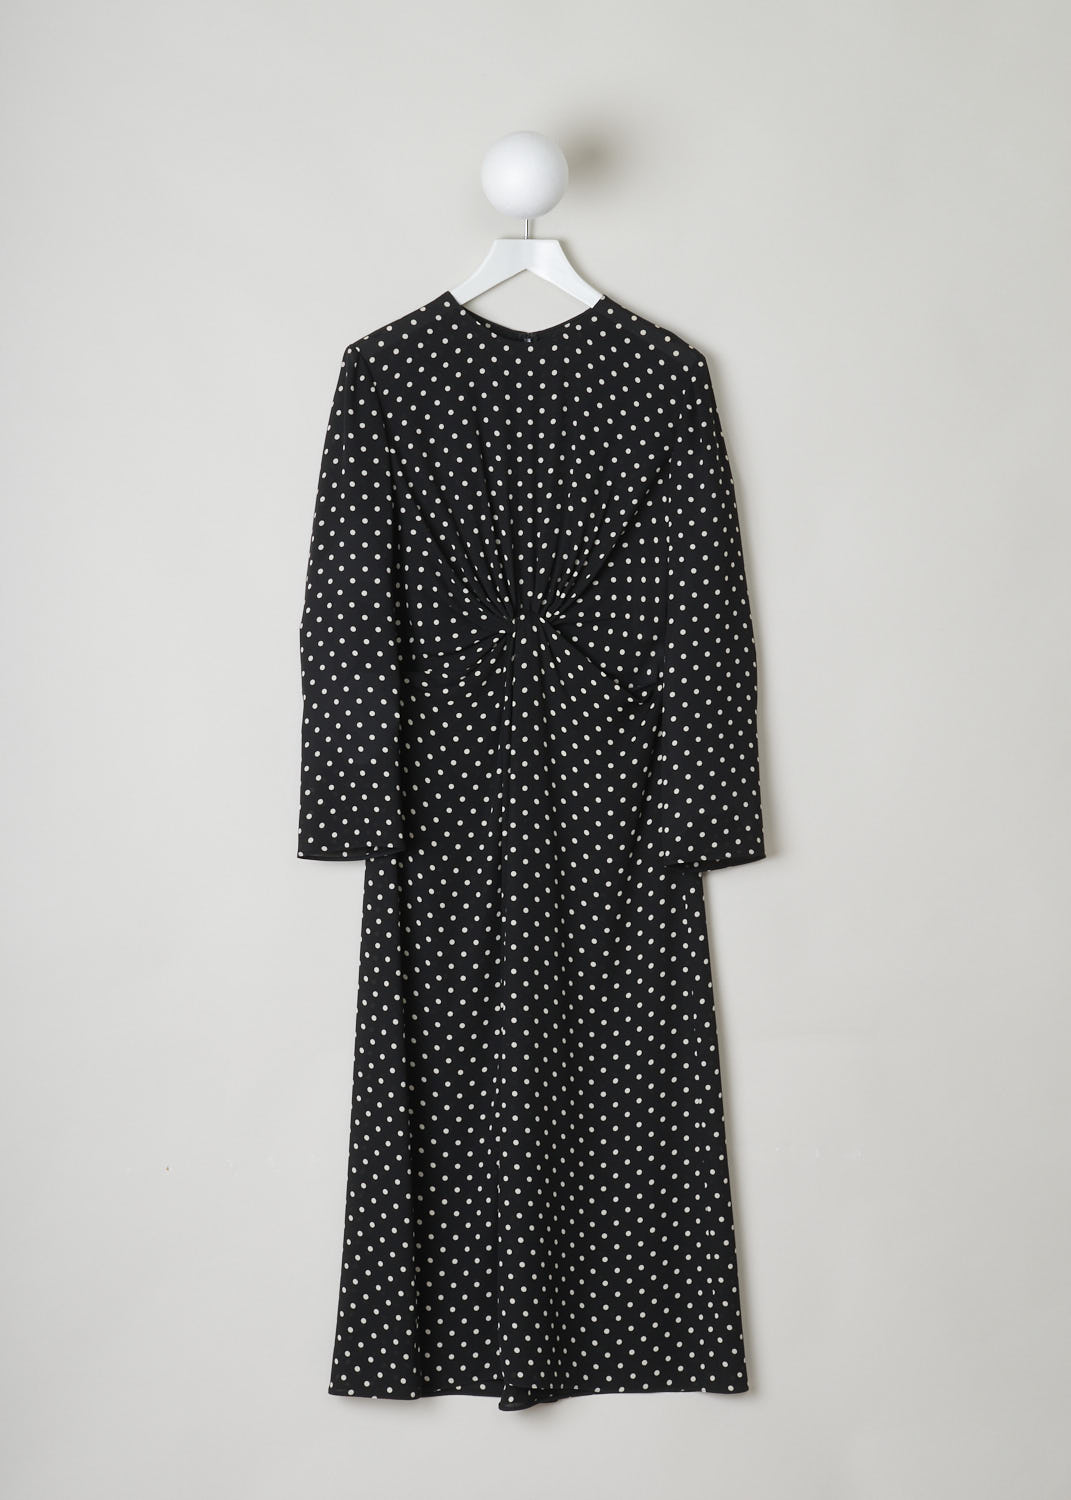 VALENTINO, SILK POLKA DOT MIDI DRESS, UB3VASO65LN_0NA, Black, Print, Front, Beautiful silk dress in a classic black and white polka dot print. This dress has a high, rounded neckline and long sleeves. A concealed zipper can be found on the back. What makes this dress stand out, is the elegant knotted detail across the front. 
